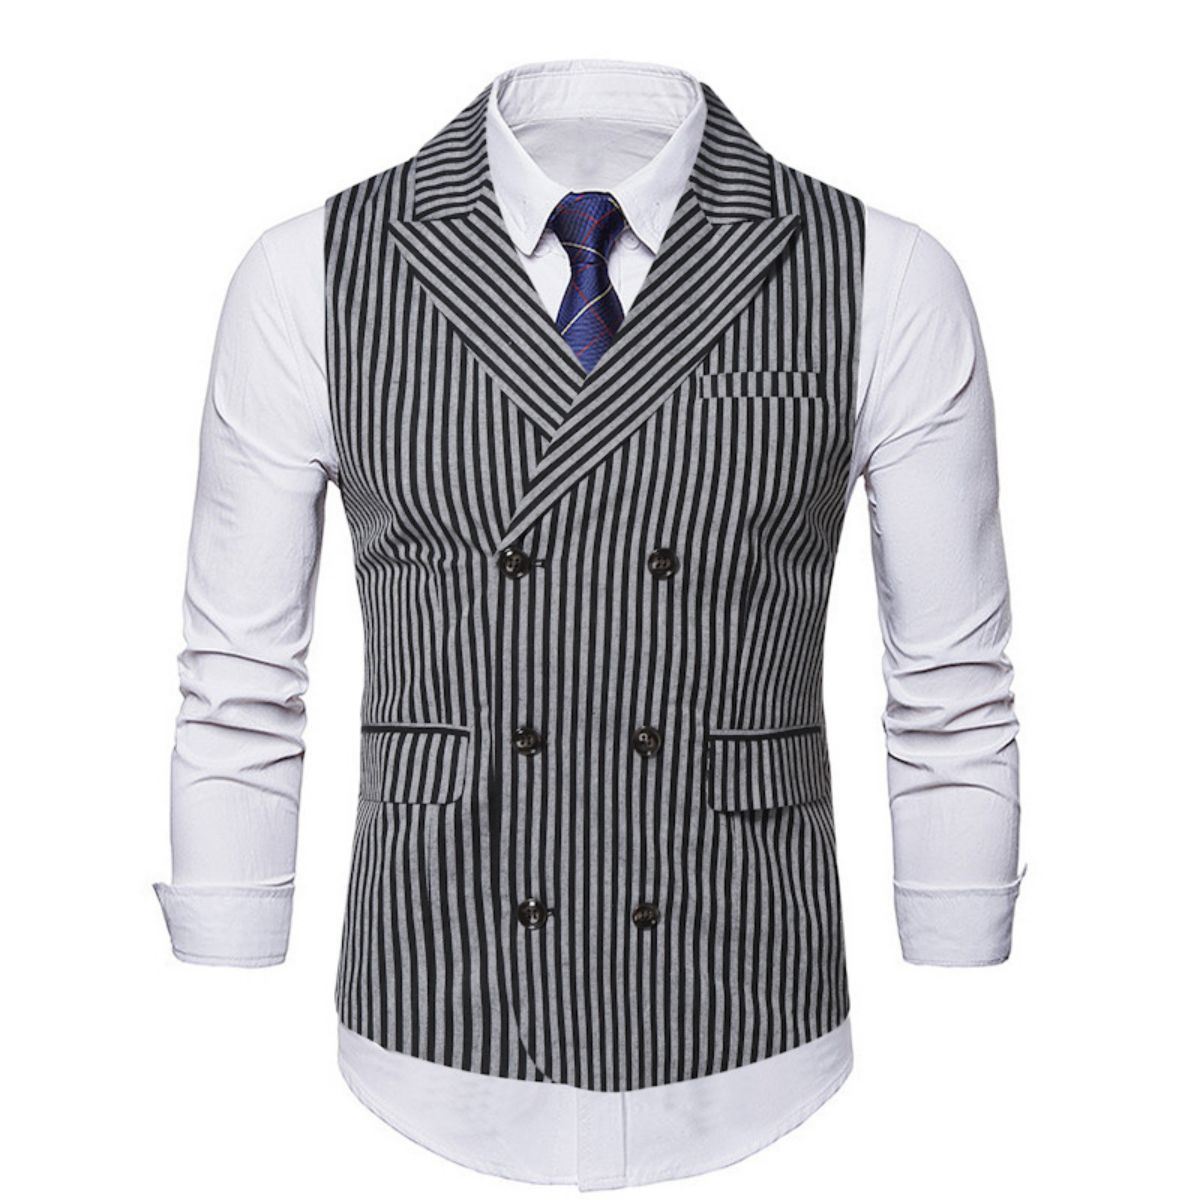 Mens Vertical Striped Waistcoat Peak Lapel Suit Vests for Formal Occasions Business Work Party Wedding Dance Dinner